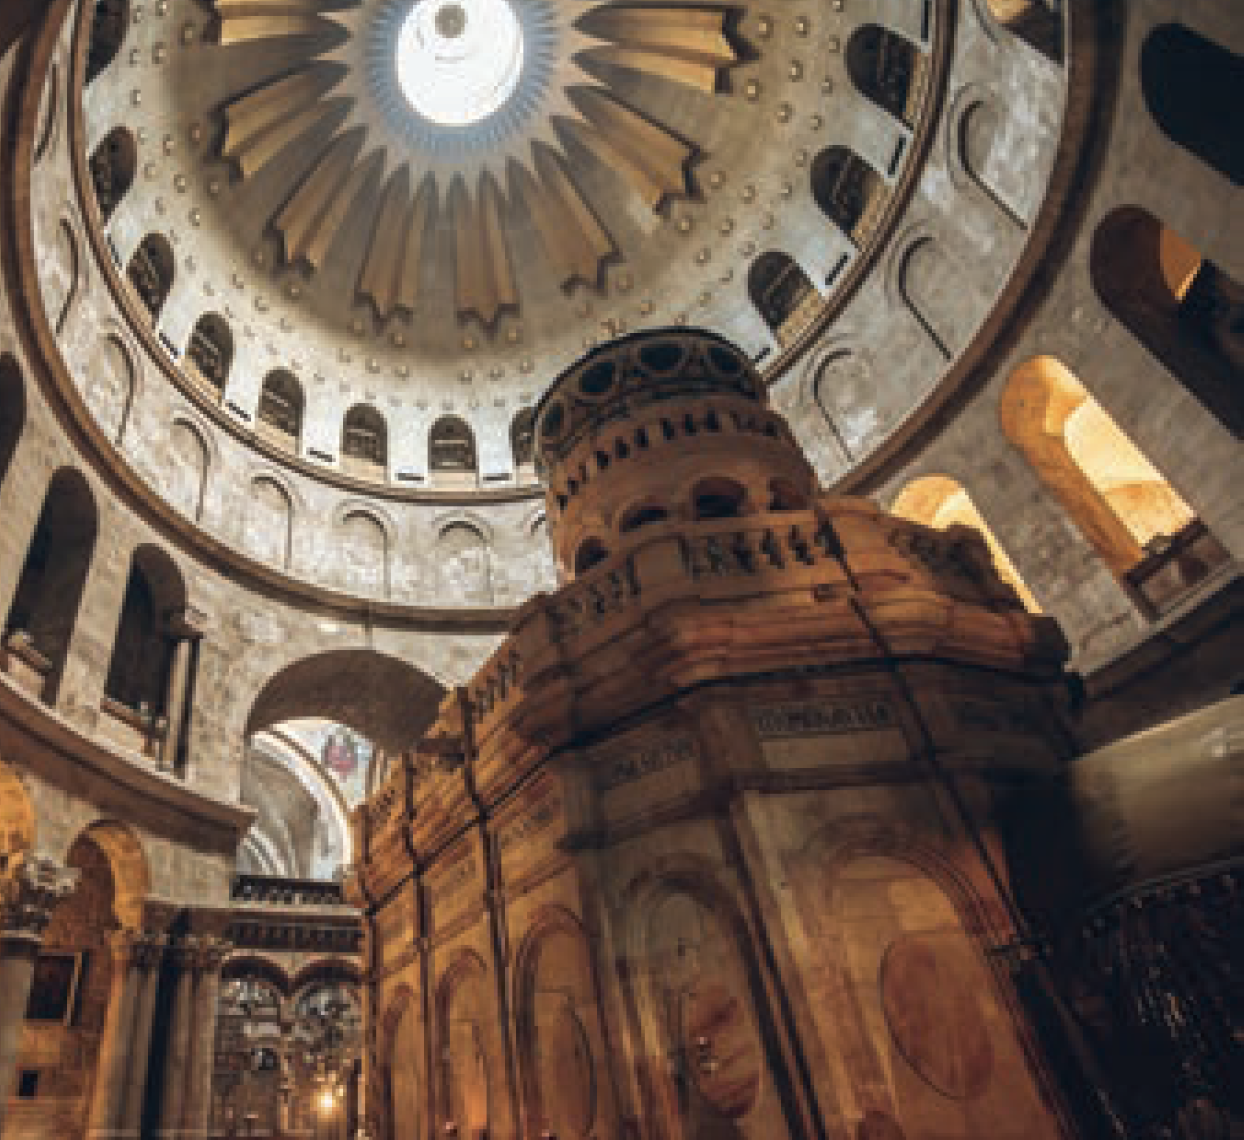 Interior of the Church of the Holy Sepulchre